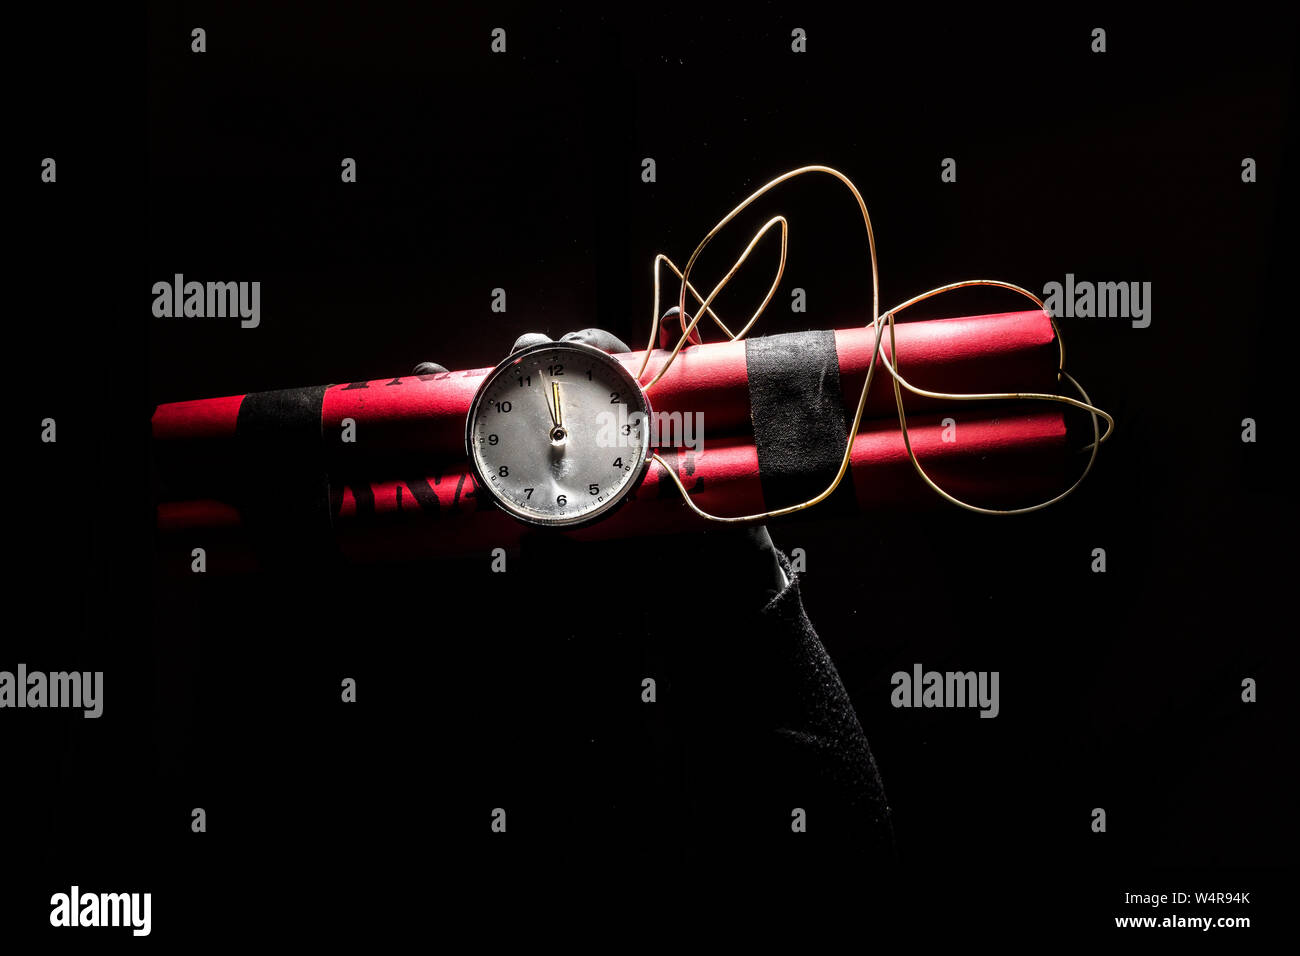 Dynamite bomb with a timer, and a bunch of dynamite on black background. Dynamite is going to explode or detonate per 1 second. Stock Photo